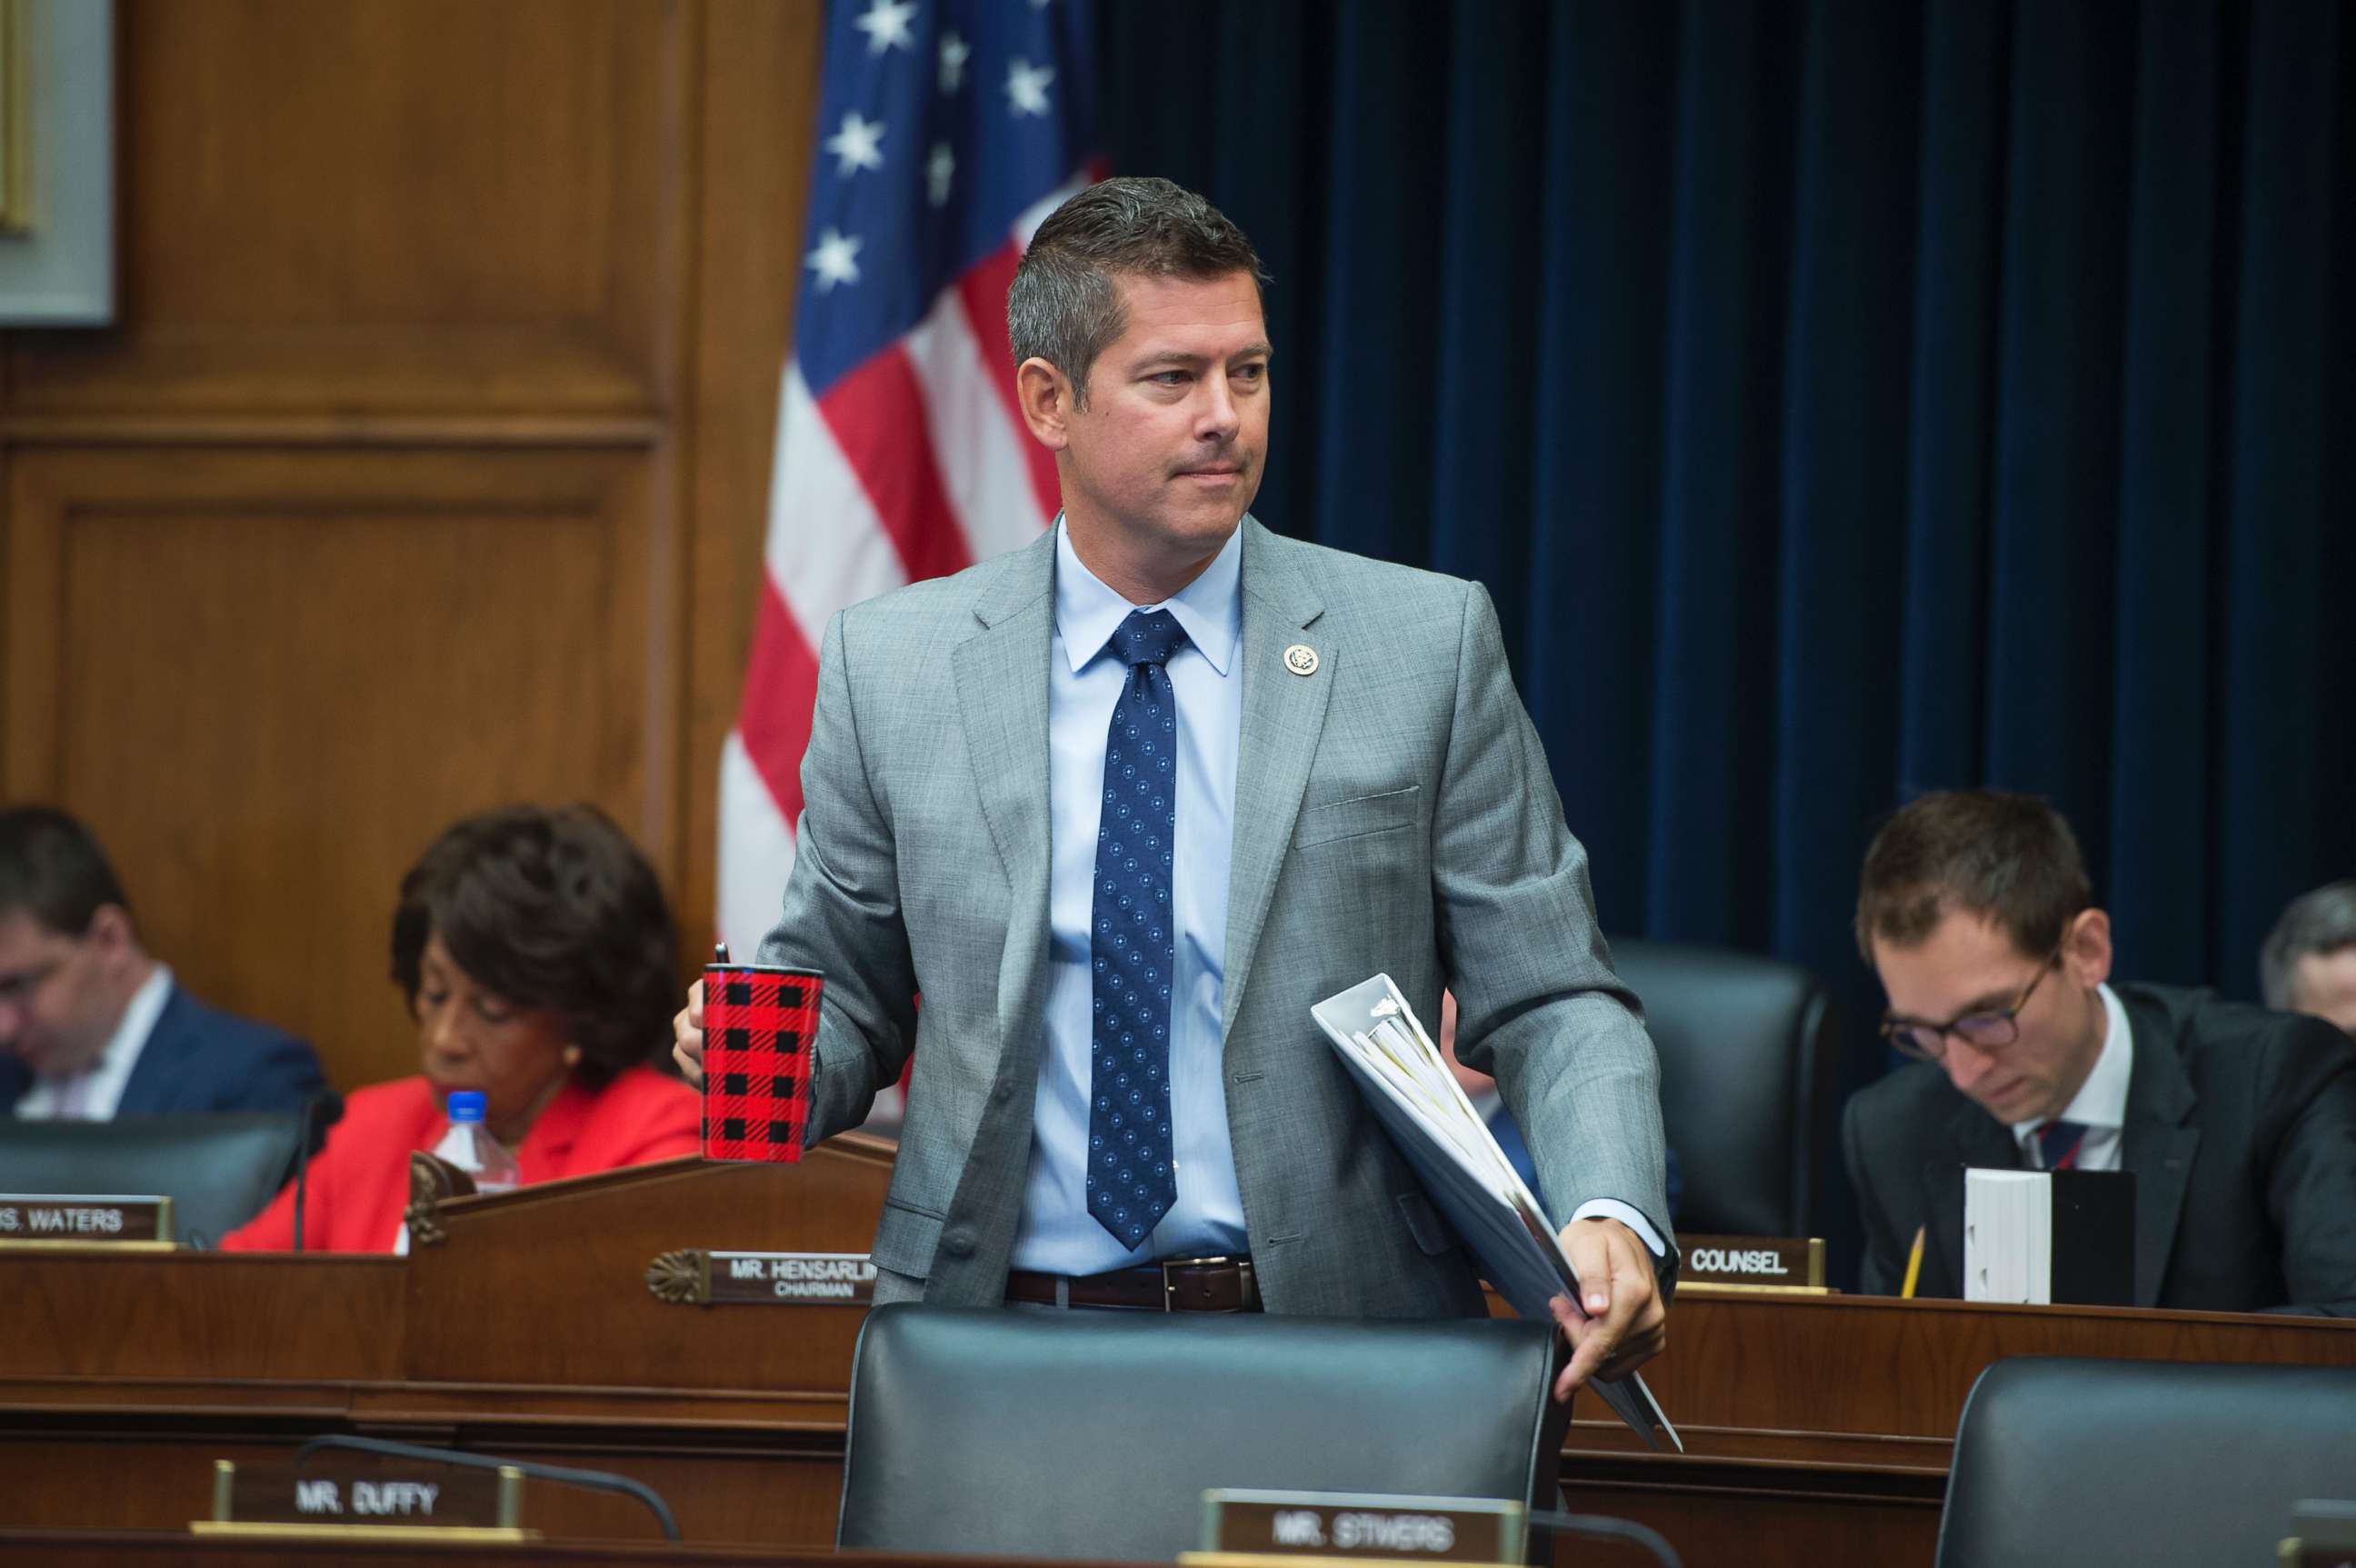 PHOTO: Rep. Sean Duffy, R-Wis., attends a House Financial Services Committee hearing in Rayburn Building, September 28, 2016.